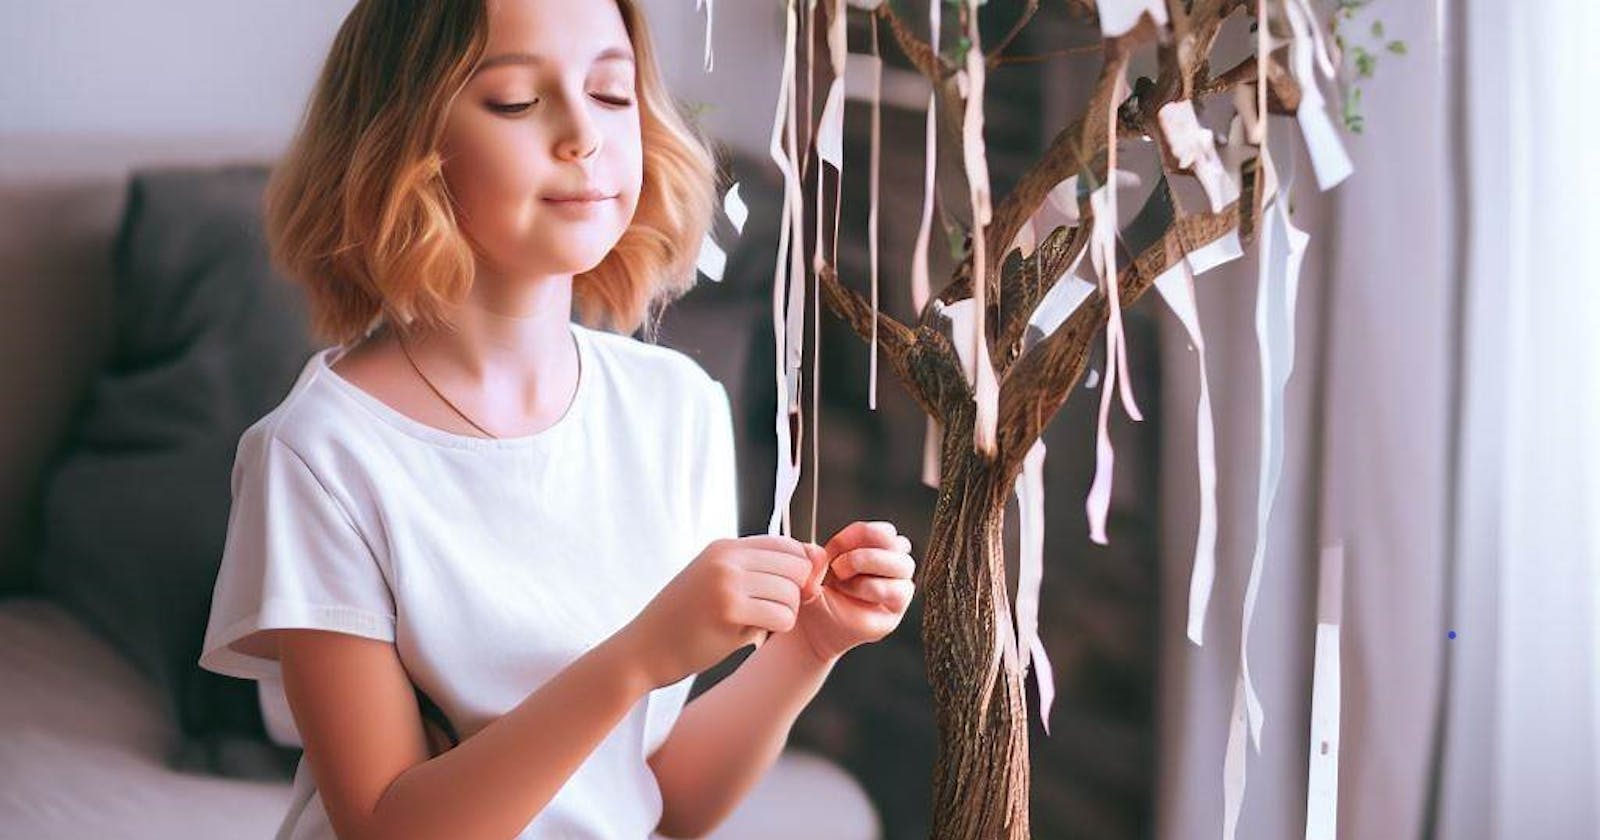 How to Make Your Own Wishing Tree at Home